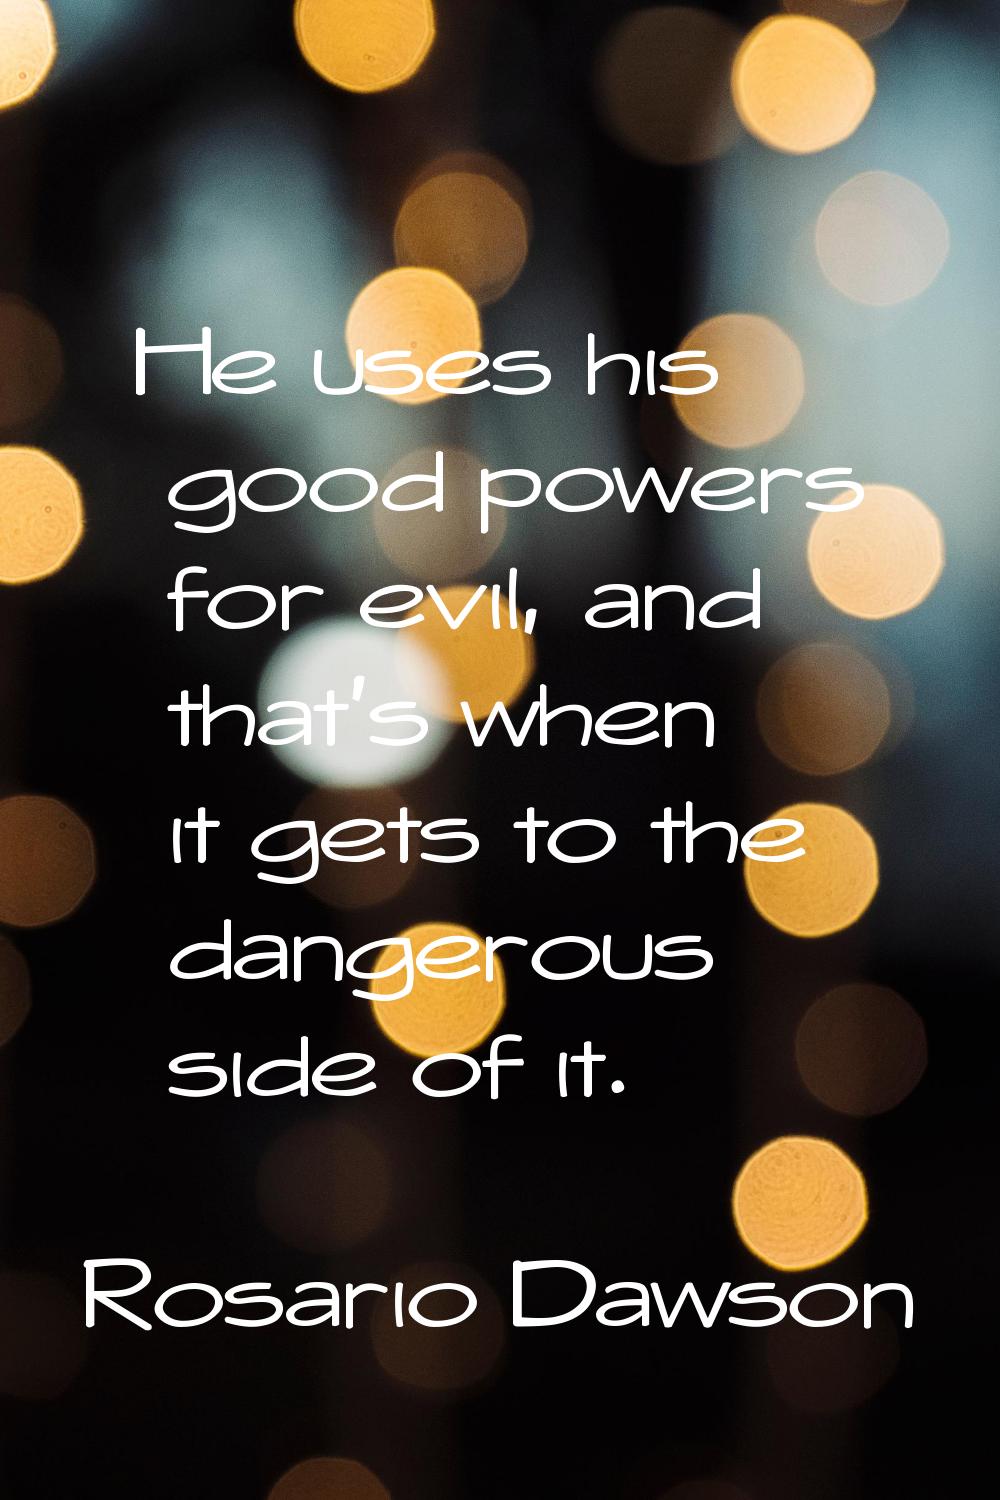 He uses his good powers for evil, and that's when it gets to the dangerous side of it.